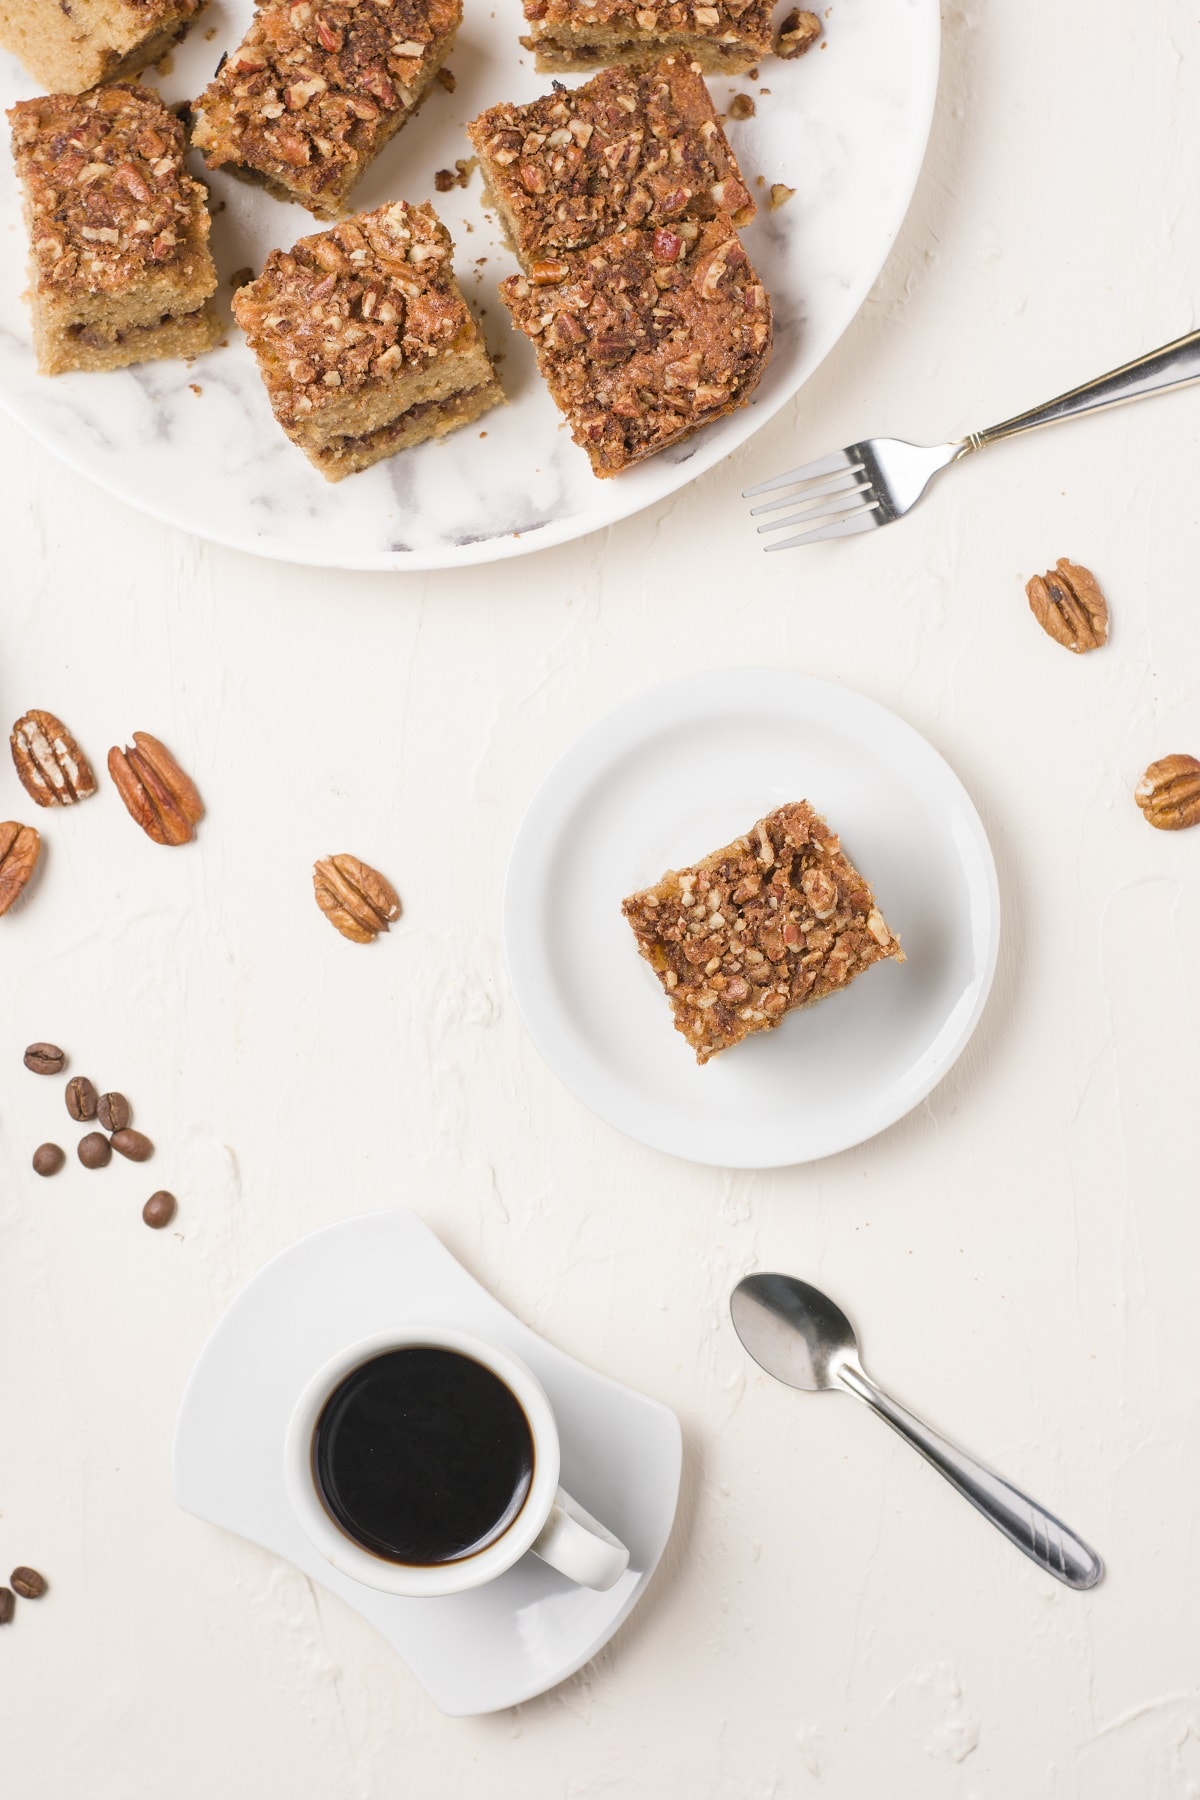 Healthy Grain-Free Coffee Cake Recipe made with almond flour and pure maple syrup - paleo, dairy-free, gluten-free, grain-free, healthy